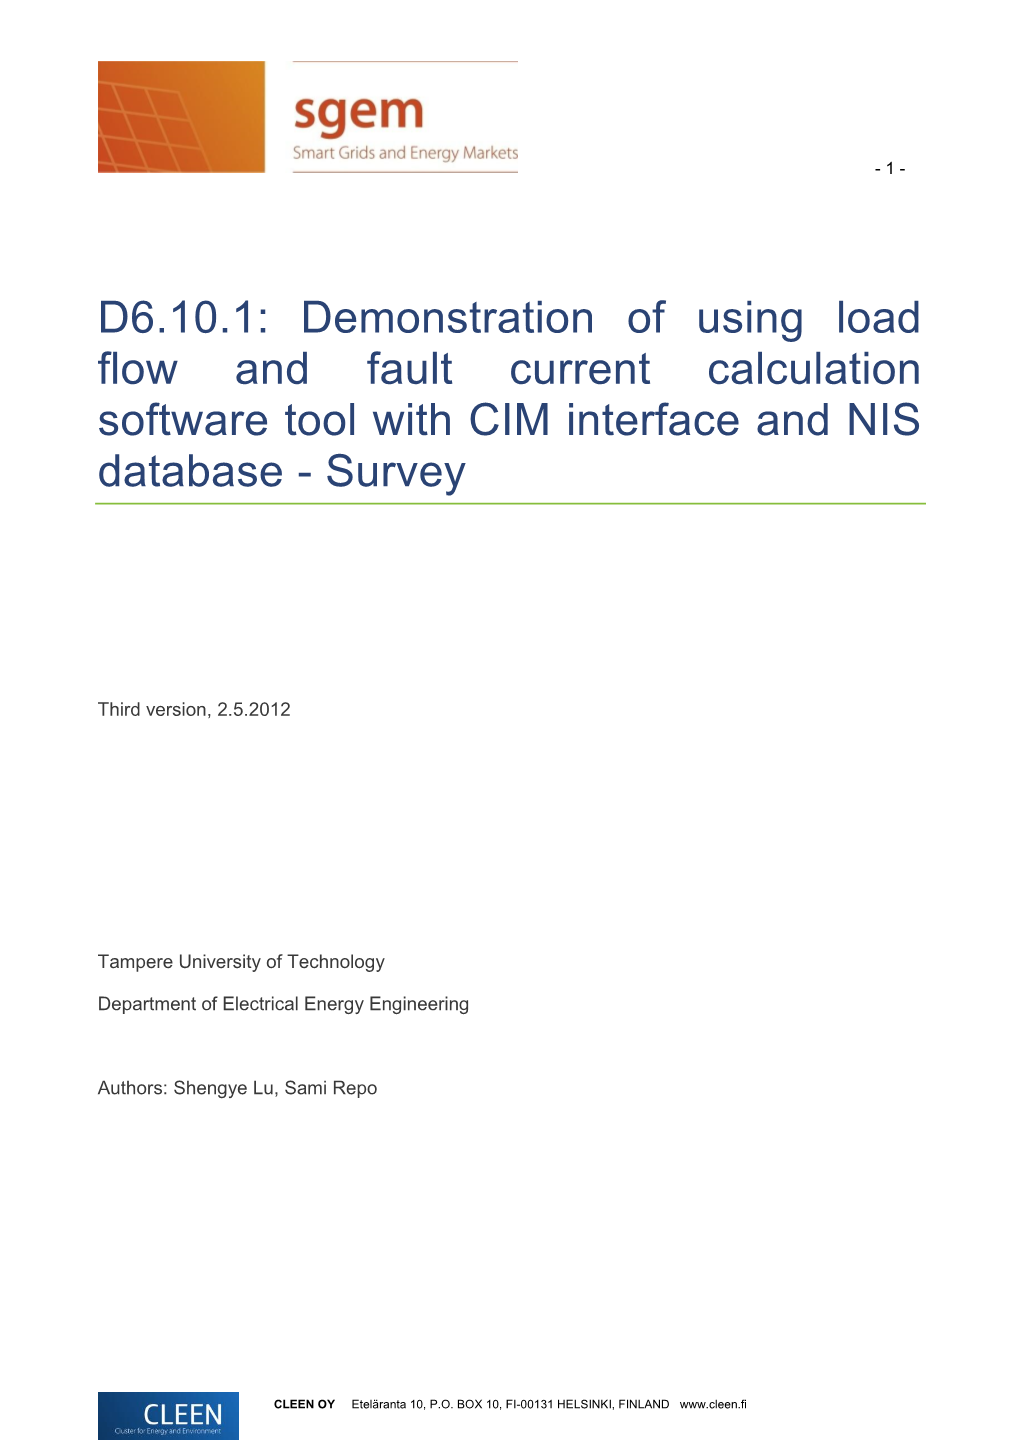 D6.10.1: Demonstration of Using Load Flow and Fault Current Calculation Software Tool with CIM Interface and NIS Database - Survey